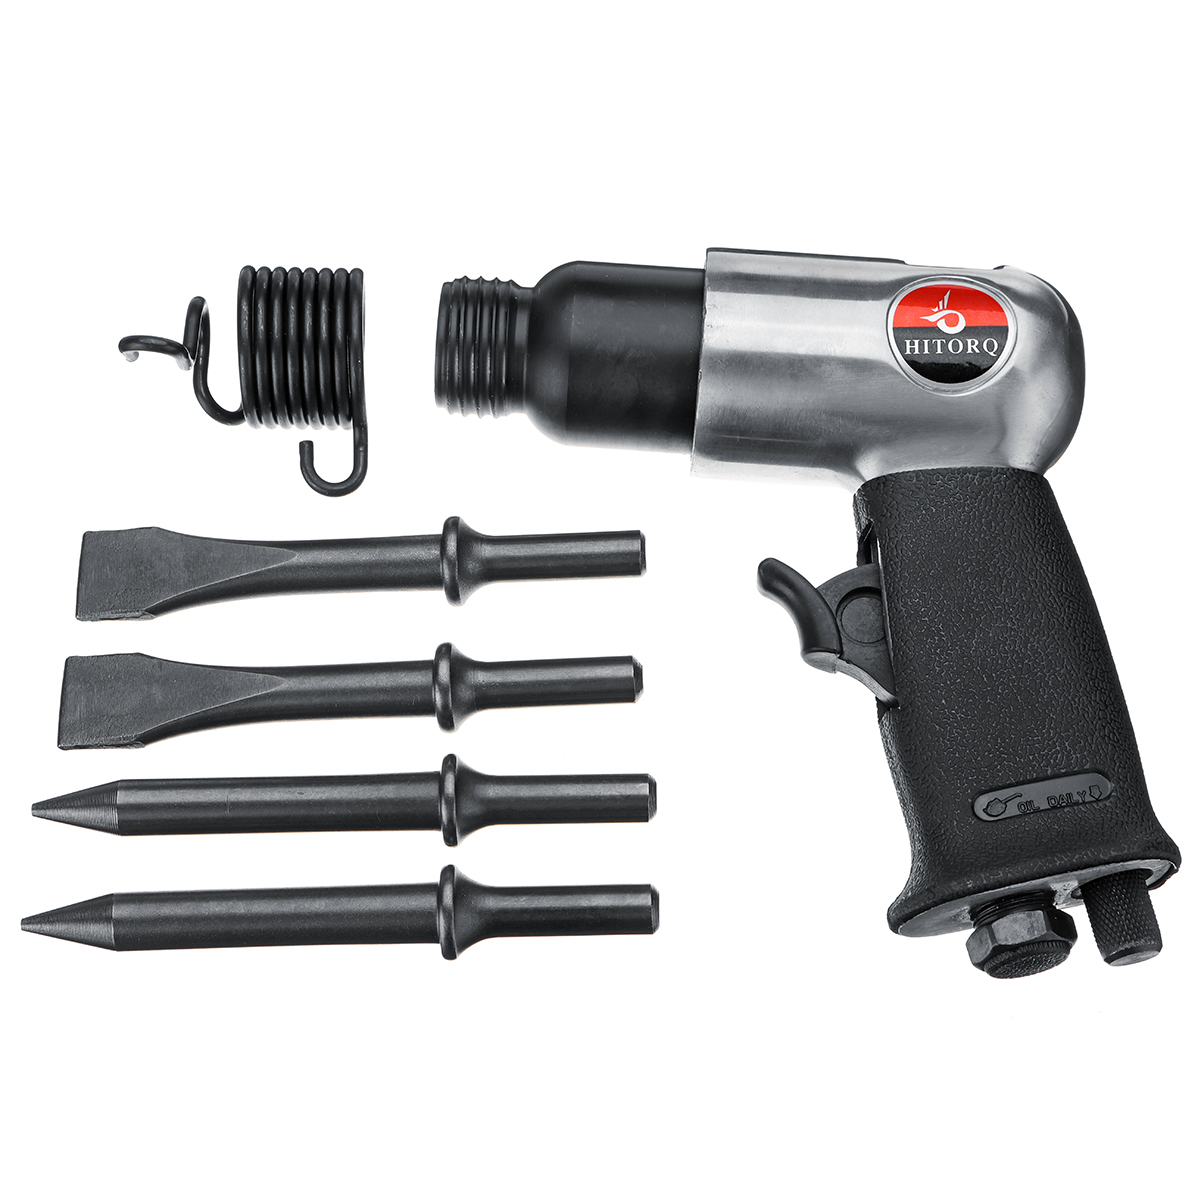 

Air Hammer Drill Gun with 4pcs Chisels 1/4 Inch Chipping Riveting Pneumatic Power Air Tool